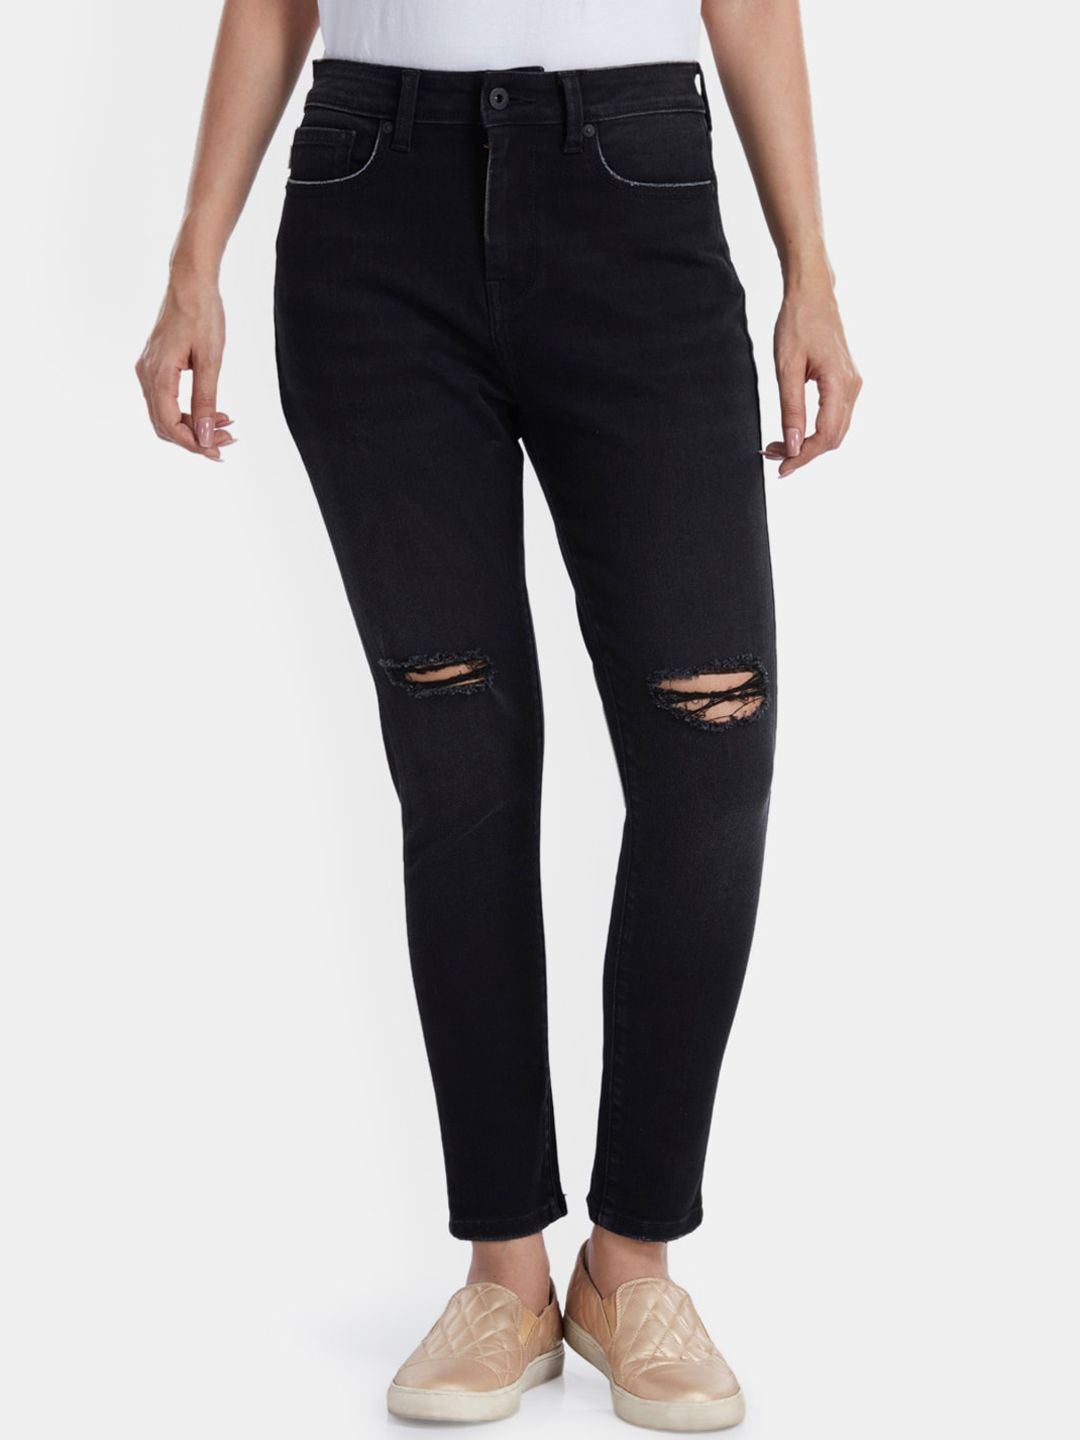 Pepe Jeans Women Black Slim Fit Jeans Price in India